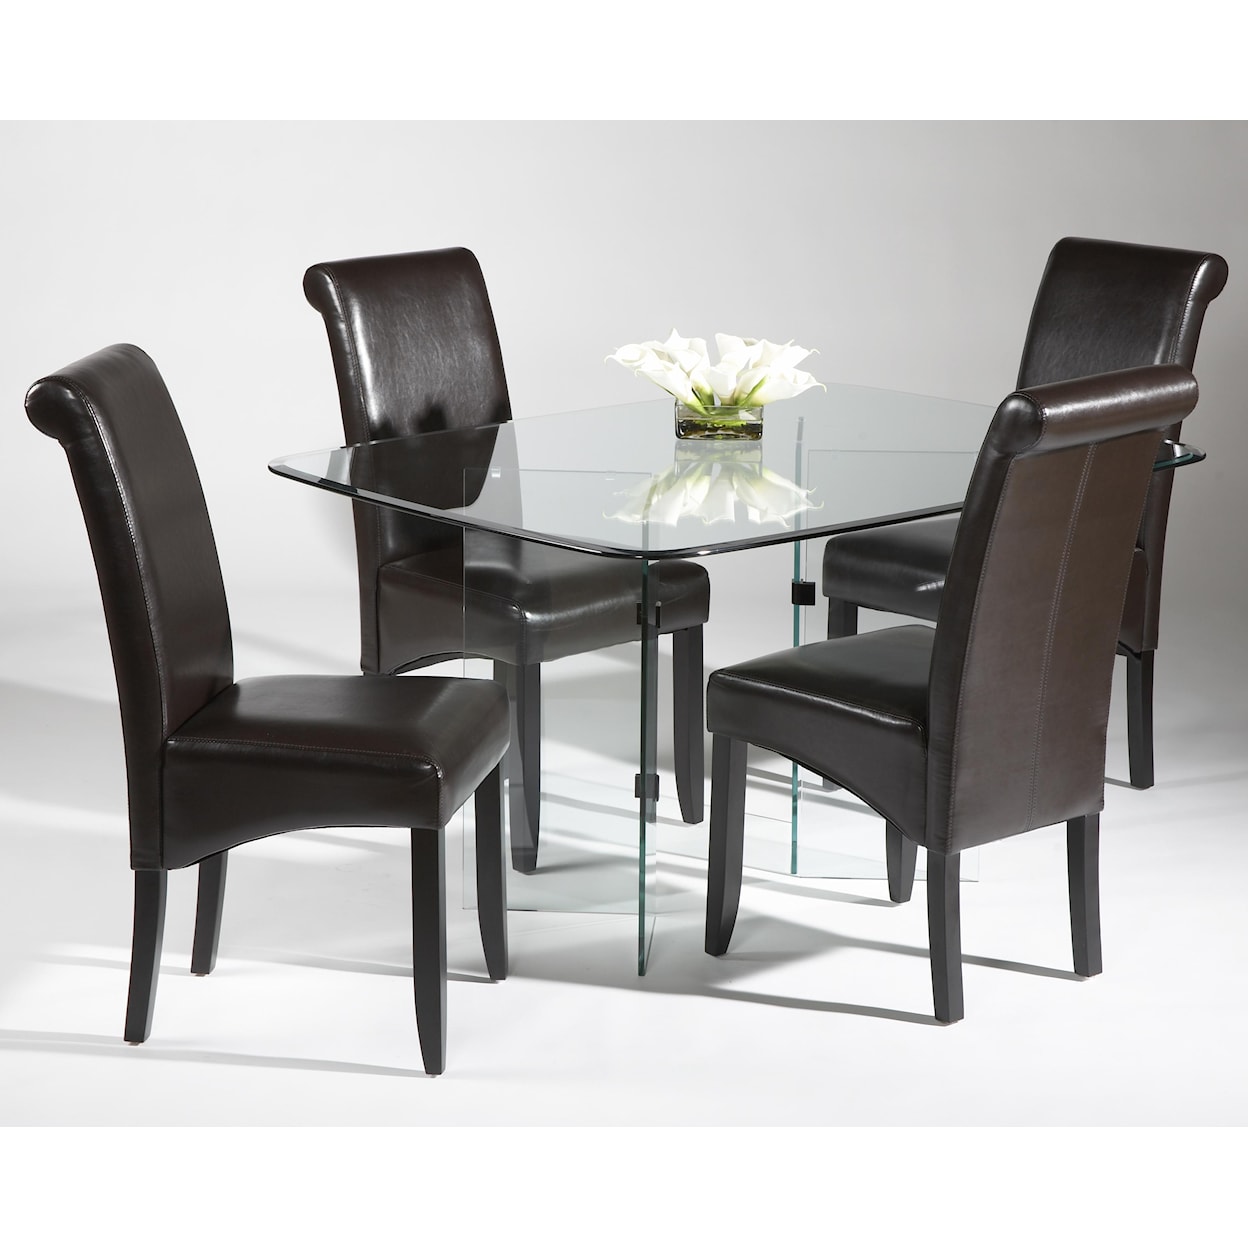 Chintaly Imports Parsons Five Piece Dining Set